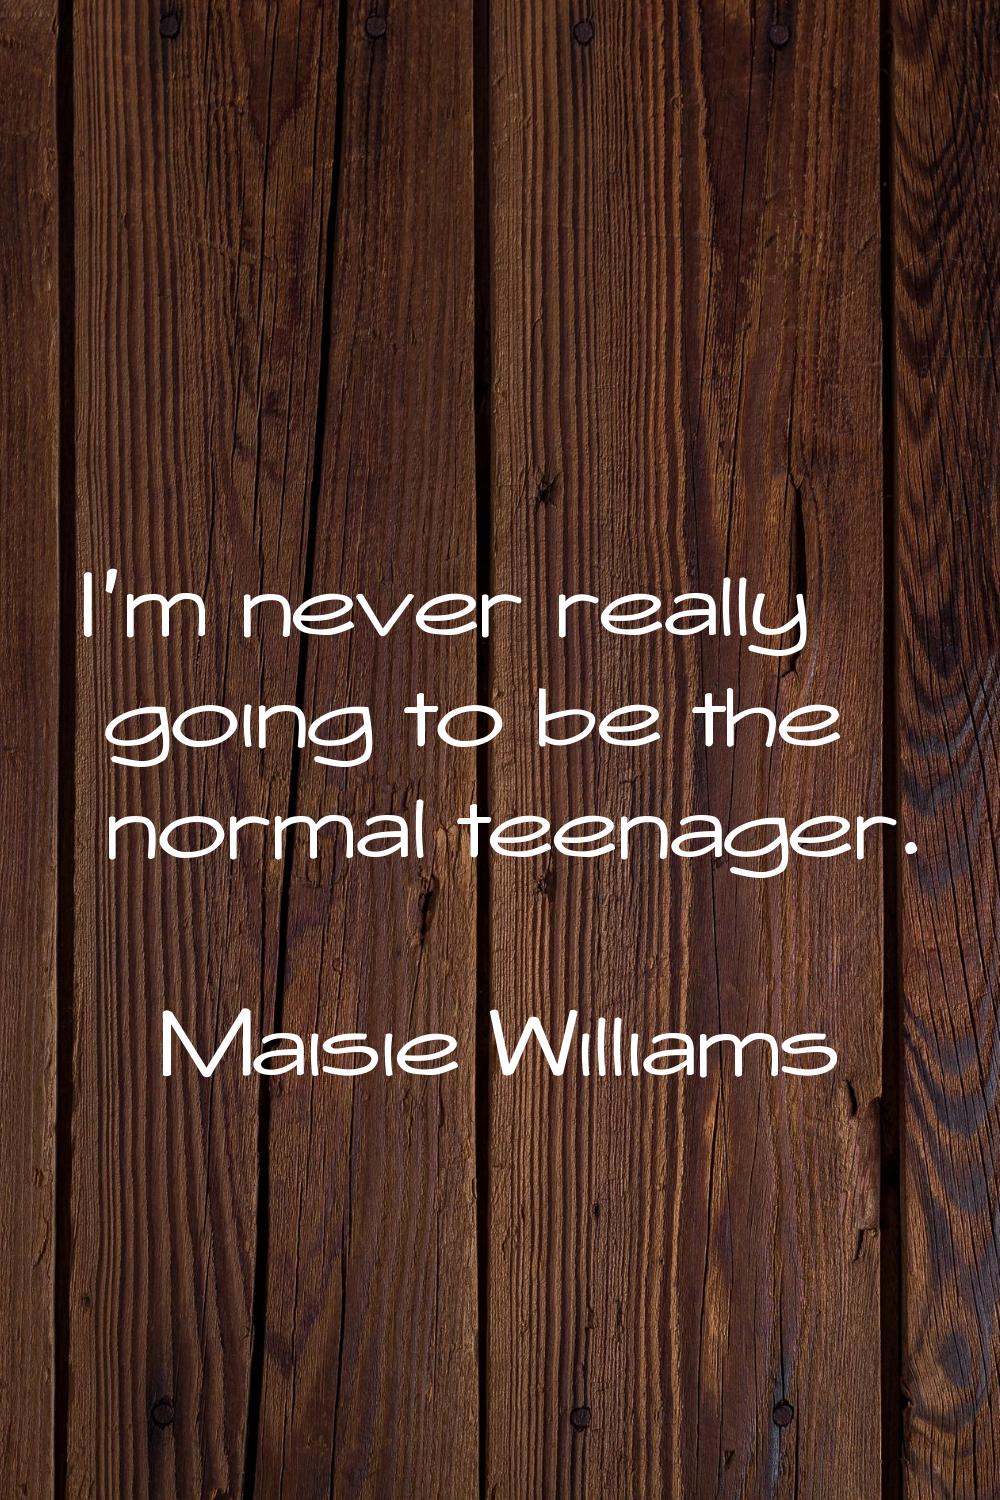 I'm never really going to be the normal teenager.